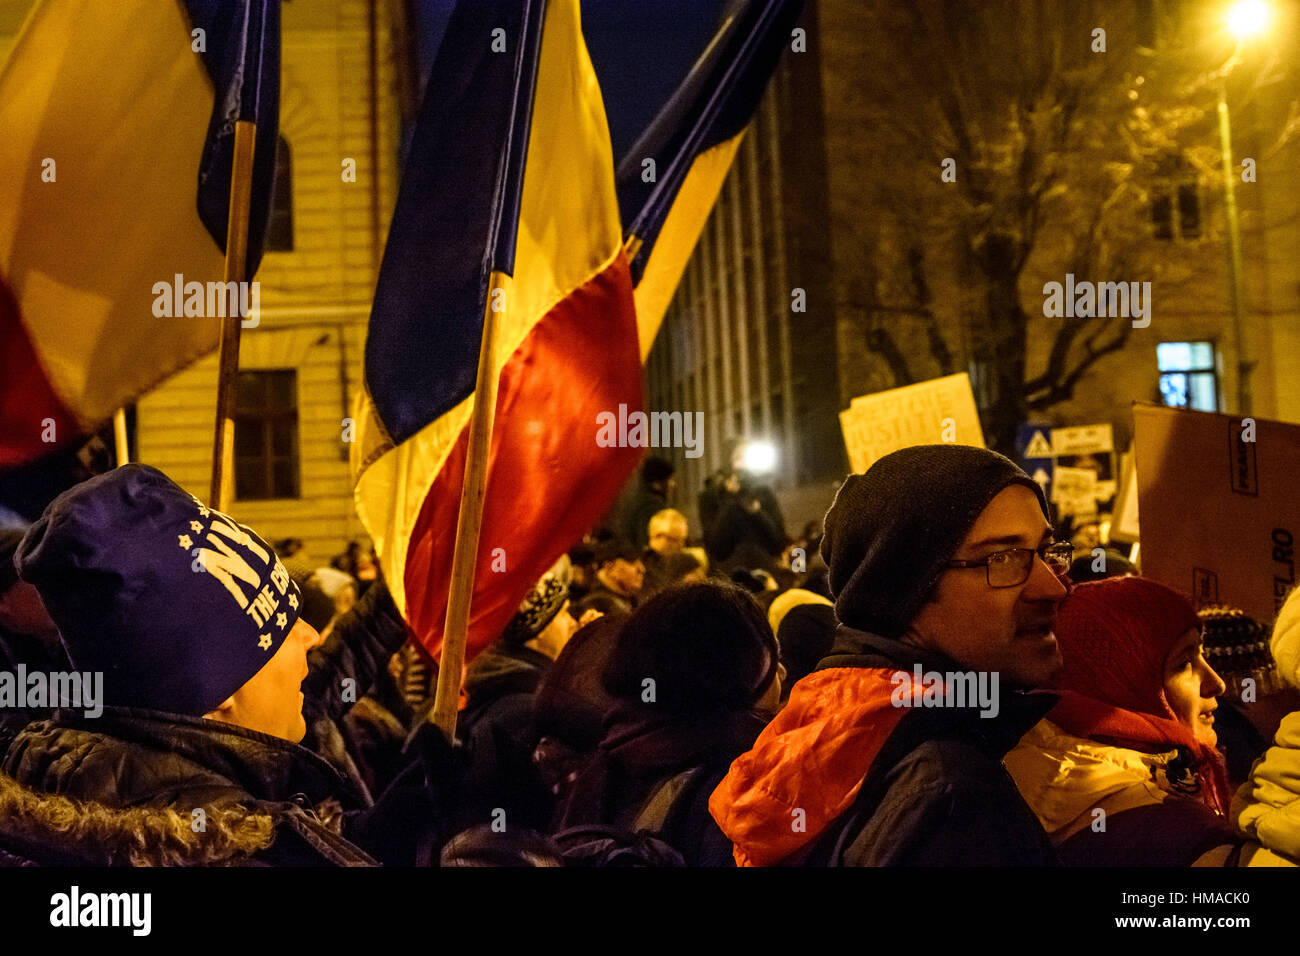 Brasov, Romania. 1st Feb, 2017. People protest against the decision of prisoner pardon, especially for corruption, on the streets of Brasov, Romania. Stock Photo